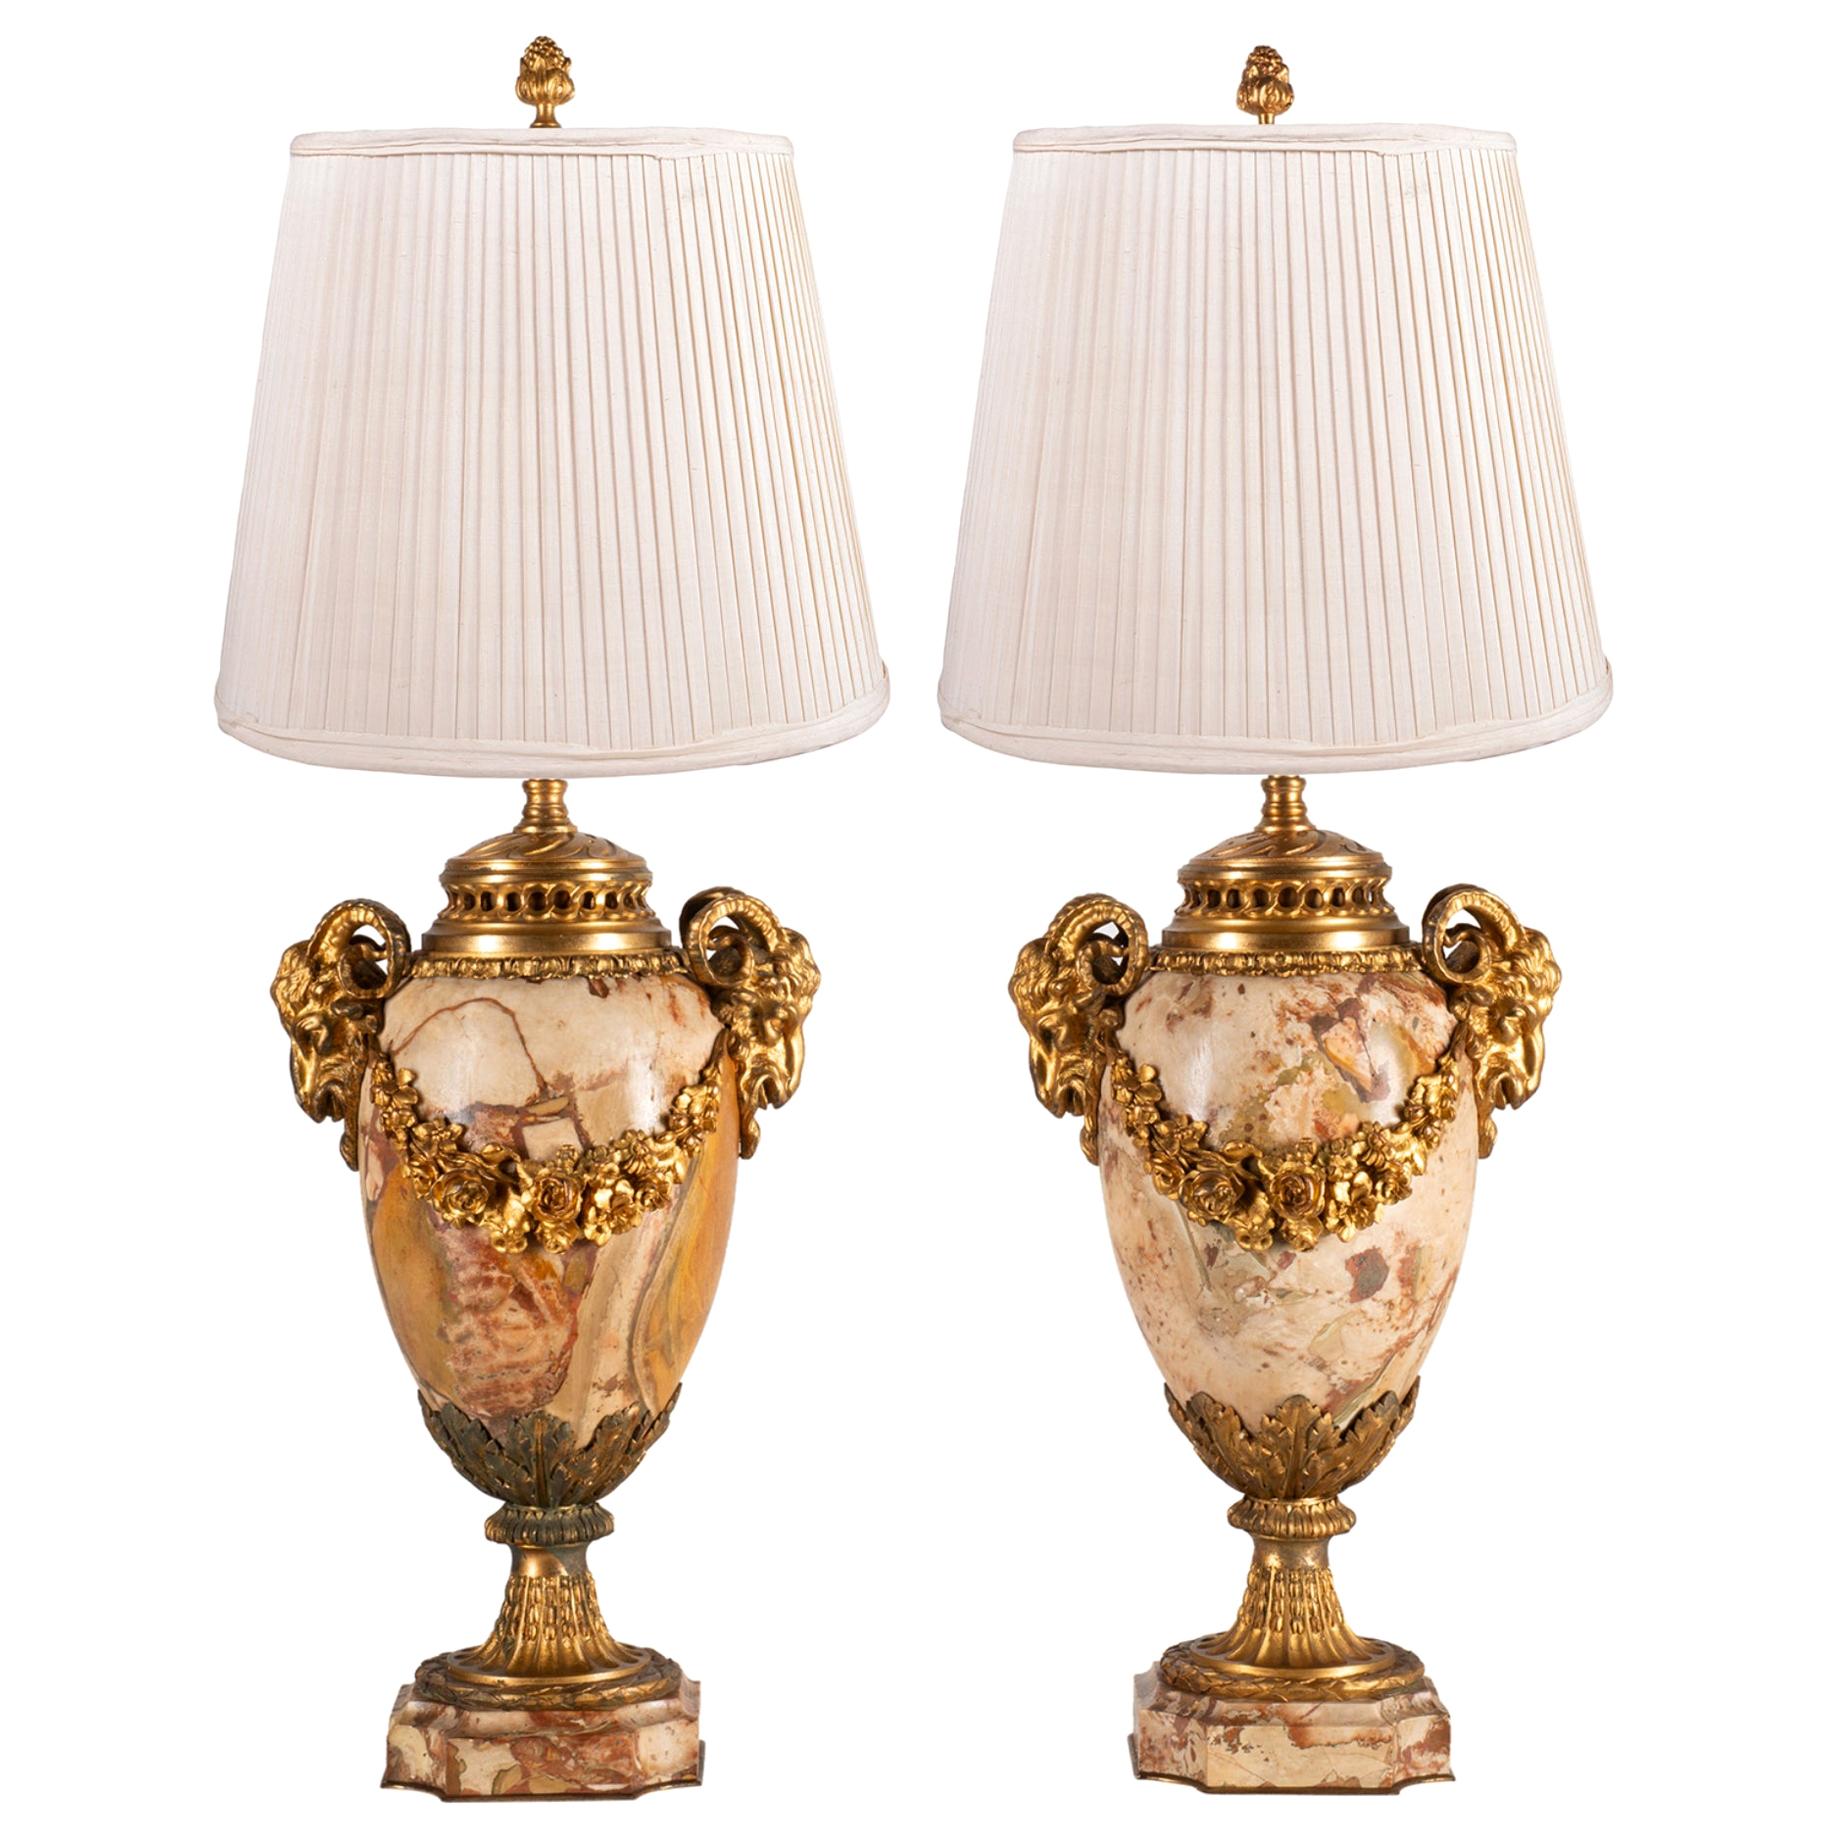 Pair of 19th Century Breccia Marble and Ormolu Urn Vases / Lamps